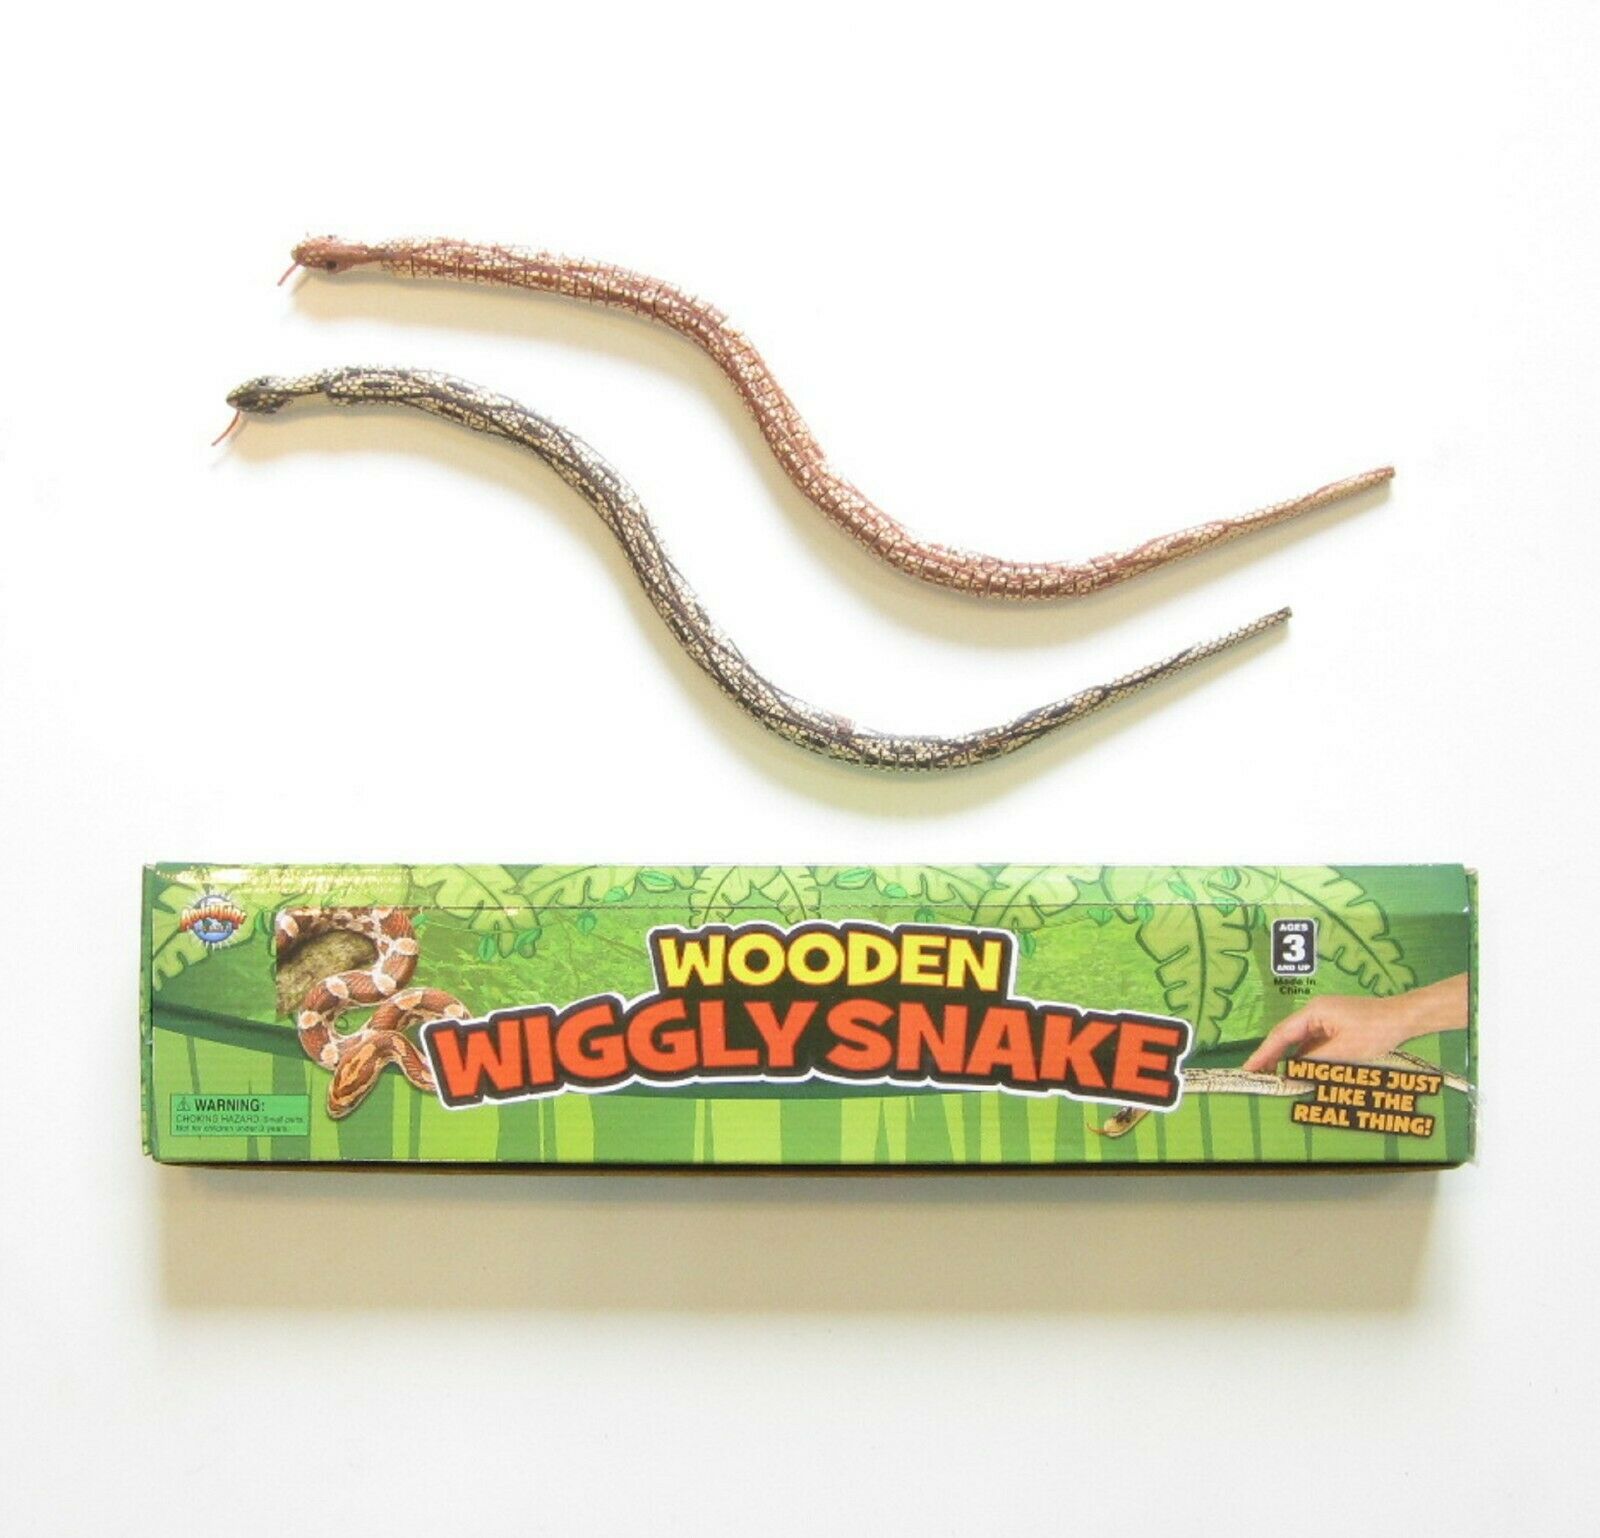 2 New Wooden Wiggle Snakes  Wood Snake Pretend Classic Toy 20" Size